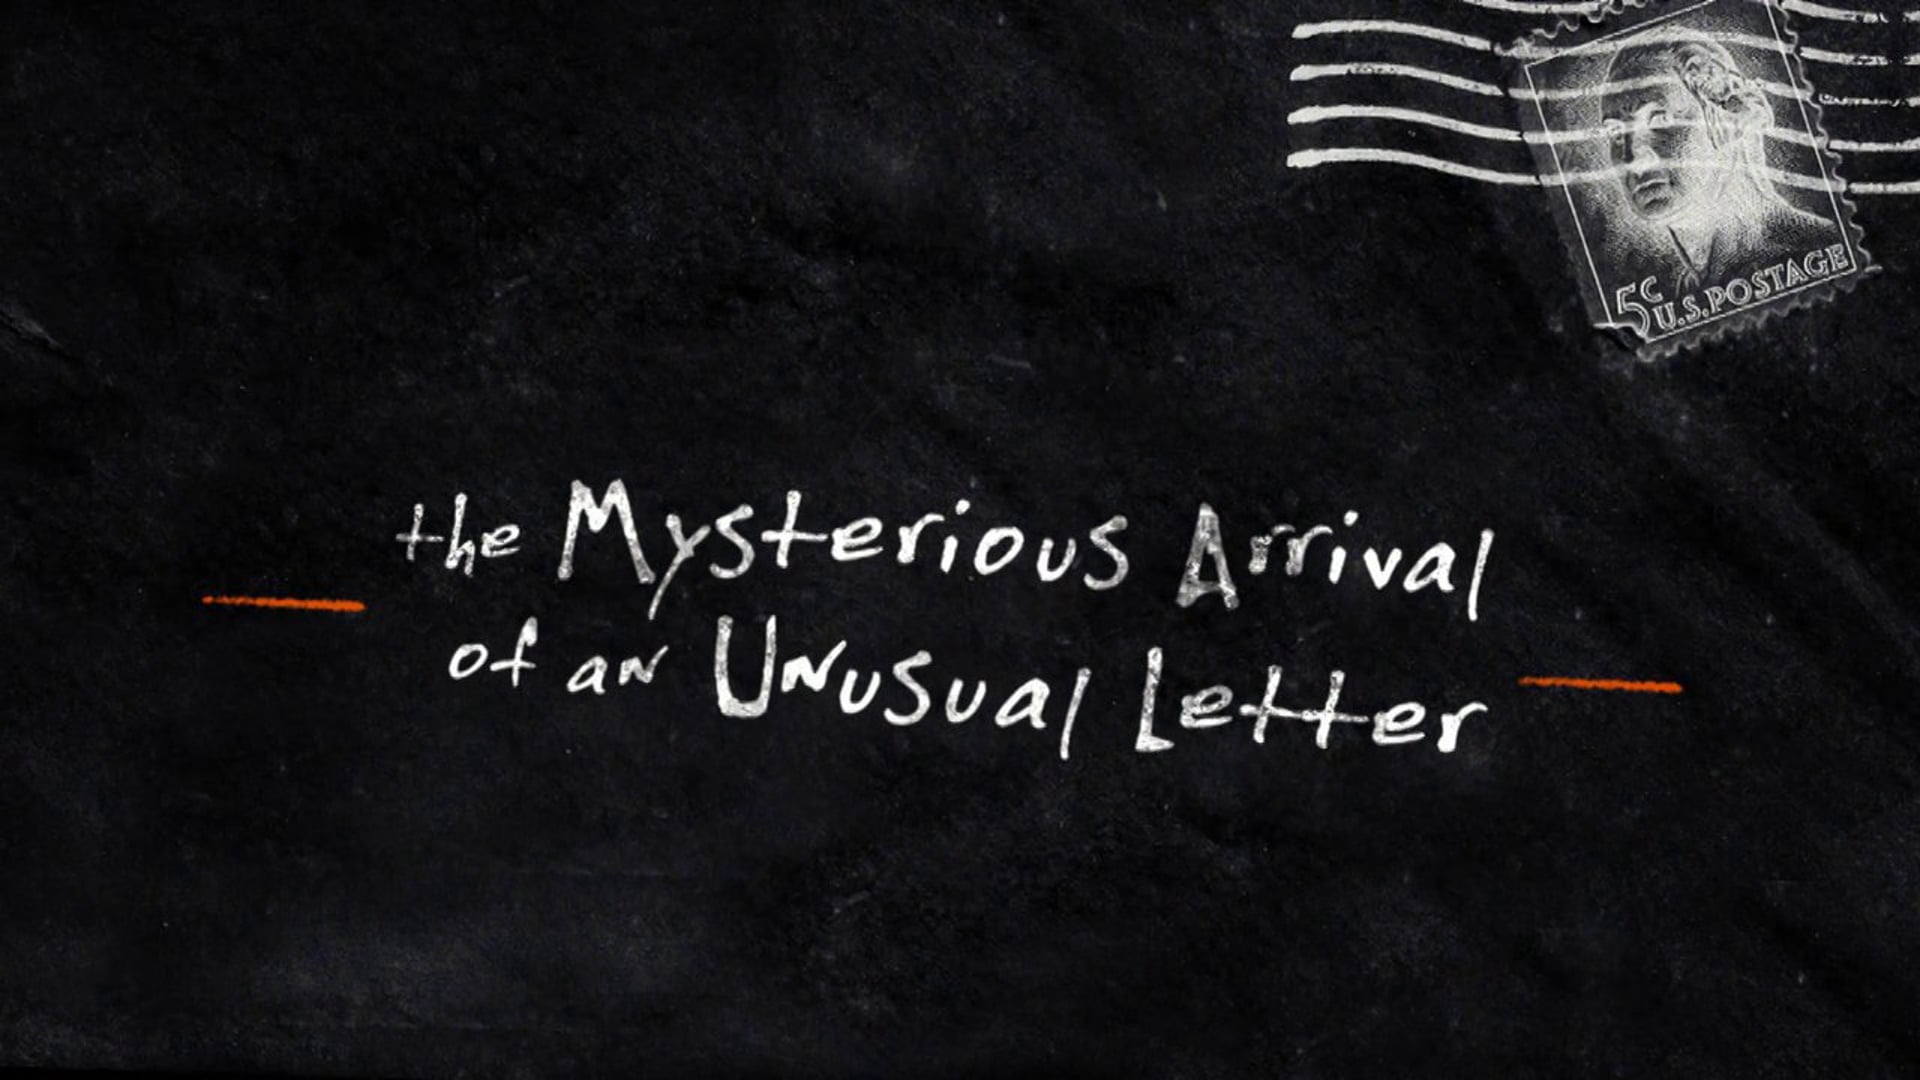 The Mysterious Arrival of an Unusual Letter | Poem by Mark Strand | Film by Scott Wenner